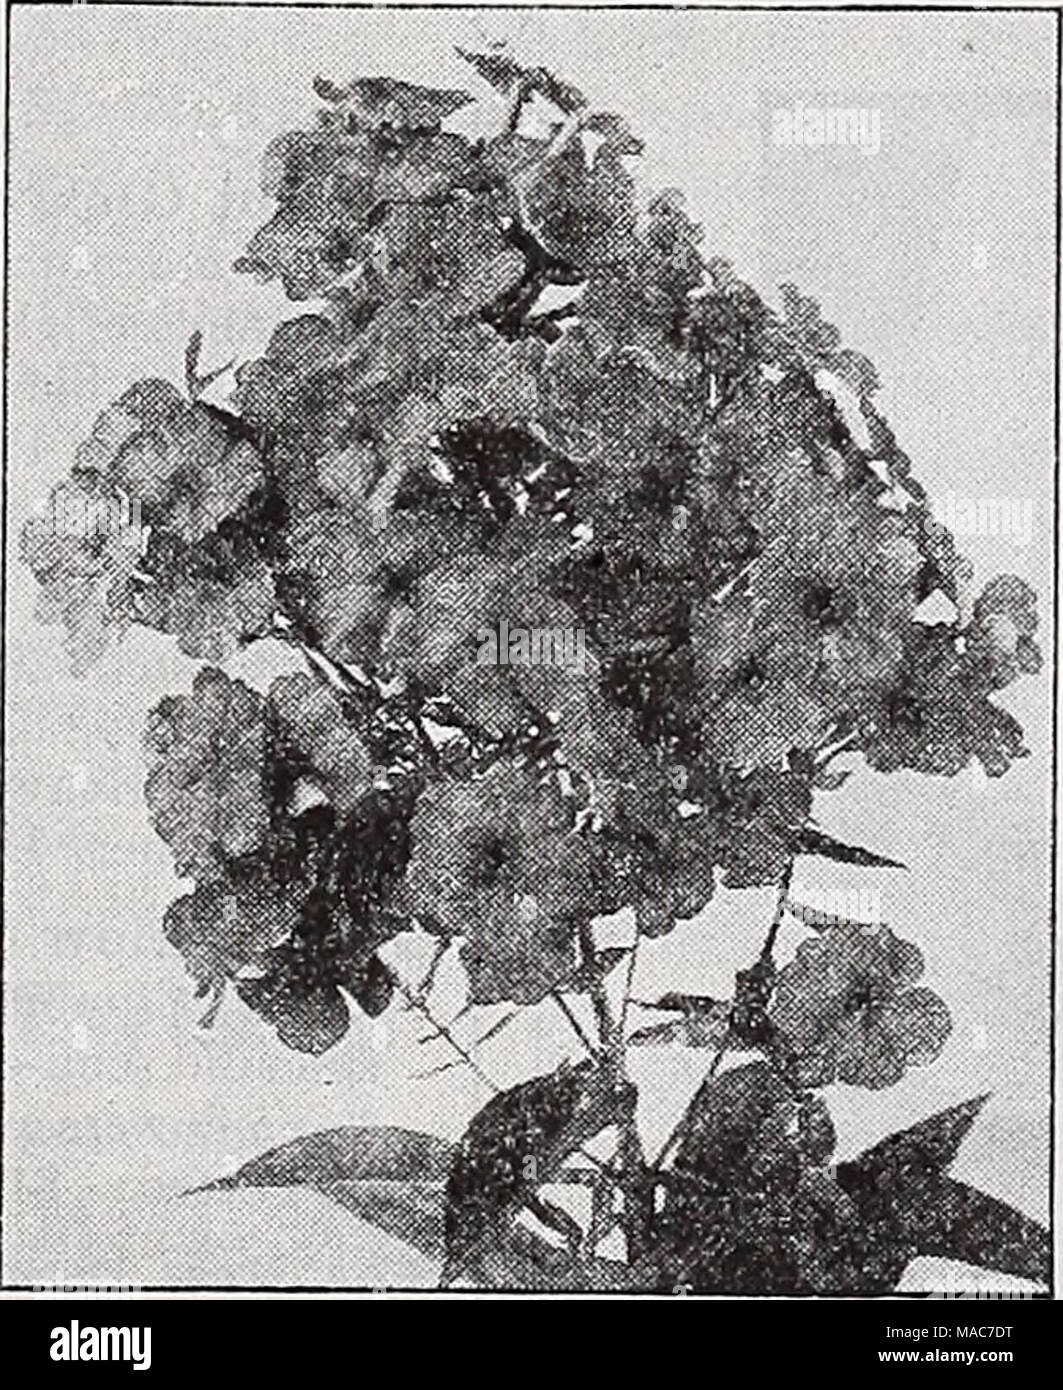 . Dreer's novelties and specialties 1939 : 101 years of Dreer quality seeds plants bulbs . Phlox, Aida Aida. Very dark carmine with crimson eye making a striking display. Blooms most profusely. 2 feet. 35c each; 3 for $1.00; 12 for $3.50. Augusta {Plant Patent No. 252). Mag- nificent large trusses of brilliant cherry- red. Will not bleach. 2 J feet. 50c each; 3 for $1.40; 12 for $5.00. Count Zeppelin. Very large pure white with a deep crimson eye. Best of the Calico type. 35c each; 3 for $1.00; 12 for $3.50. Daily Sketch. Large trusses of beautiful salmon-pink with carmine eye. 35c each; 3 for Stock Photo